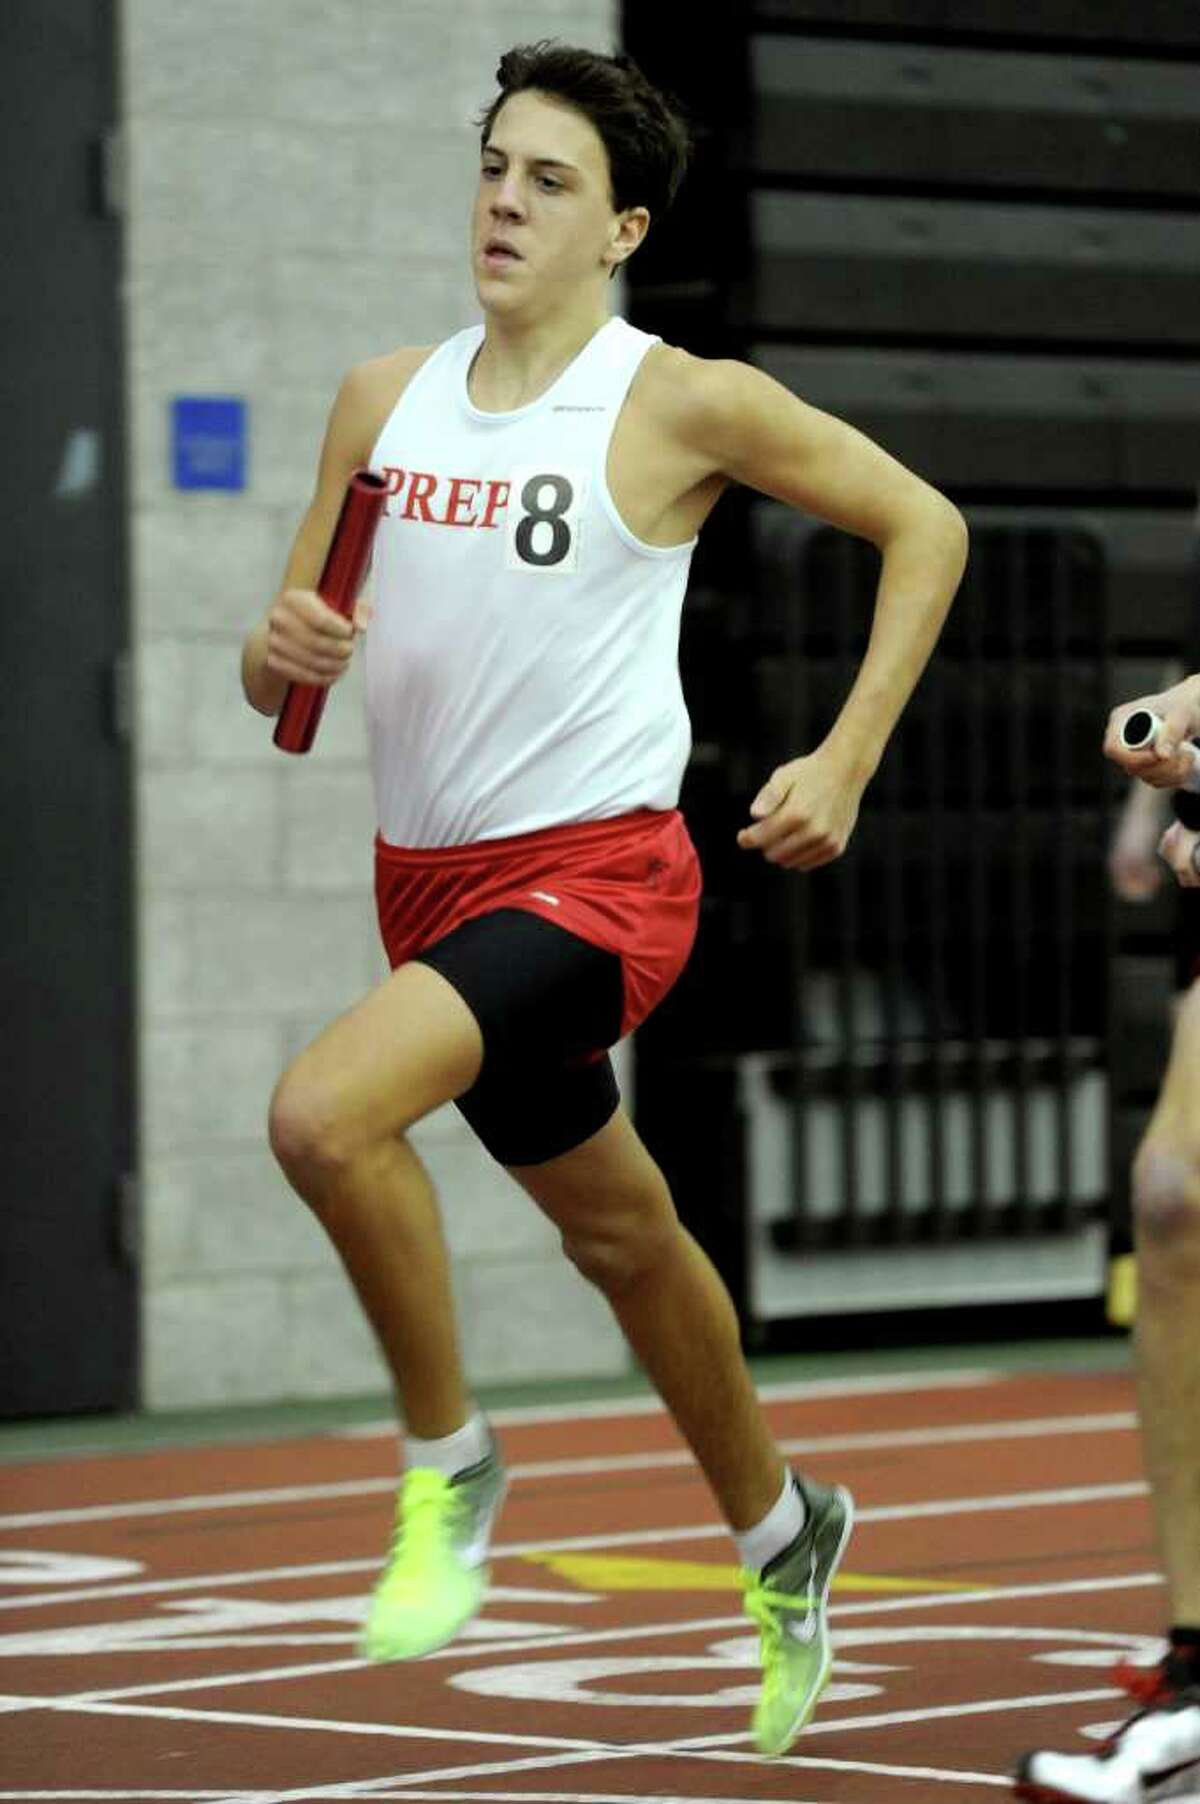 Fairfield Prep's Patrick Corona runs in the 4x800 relay during Saturday's Class LL track championship meet at the New Haven Athletic Center on February 12, 2011.